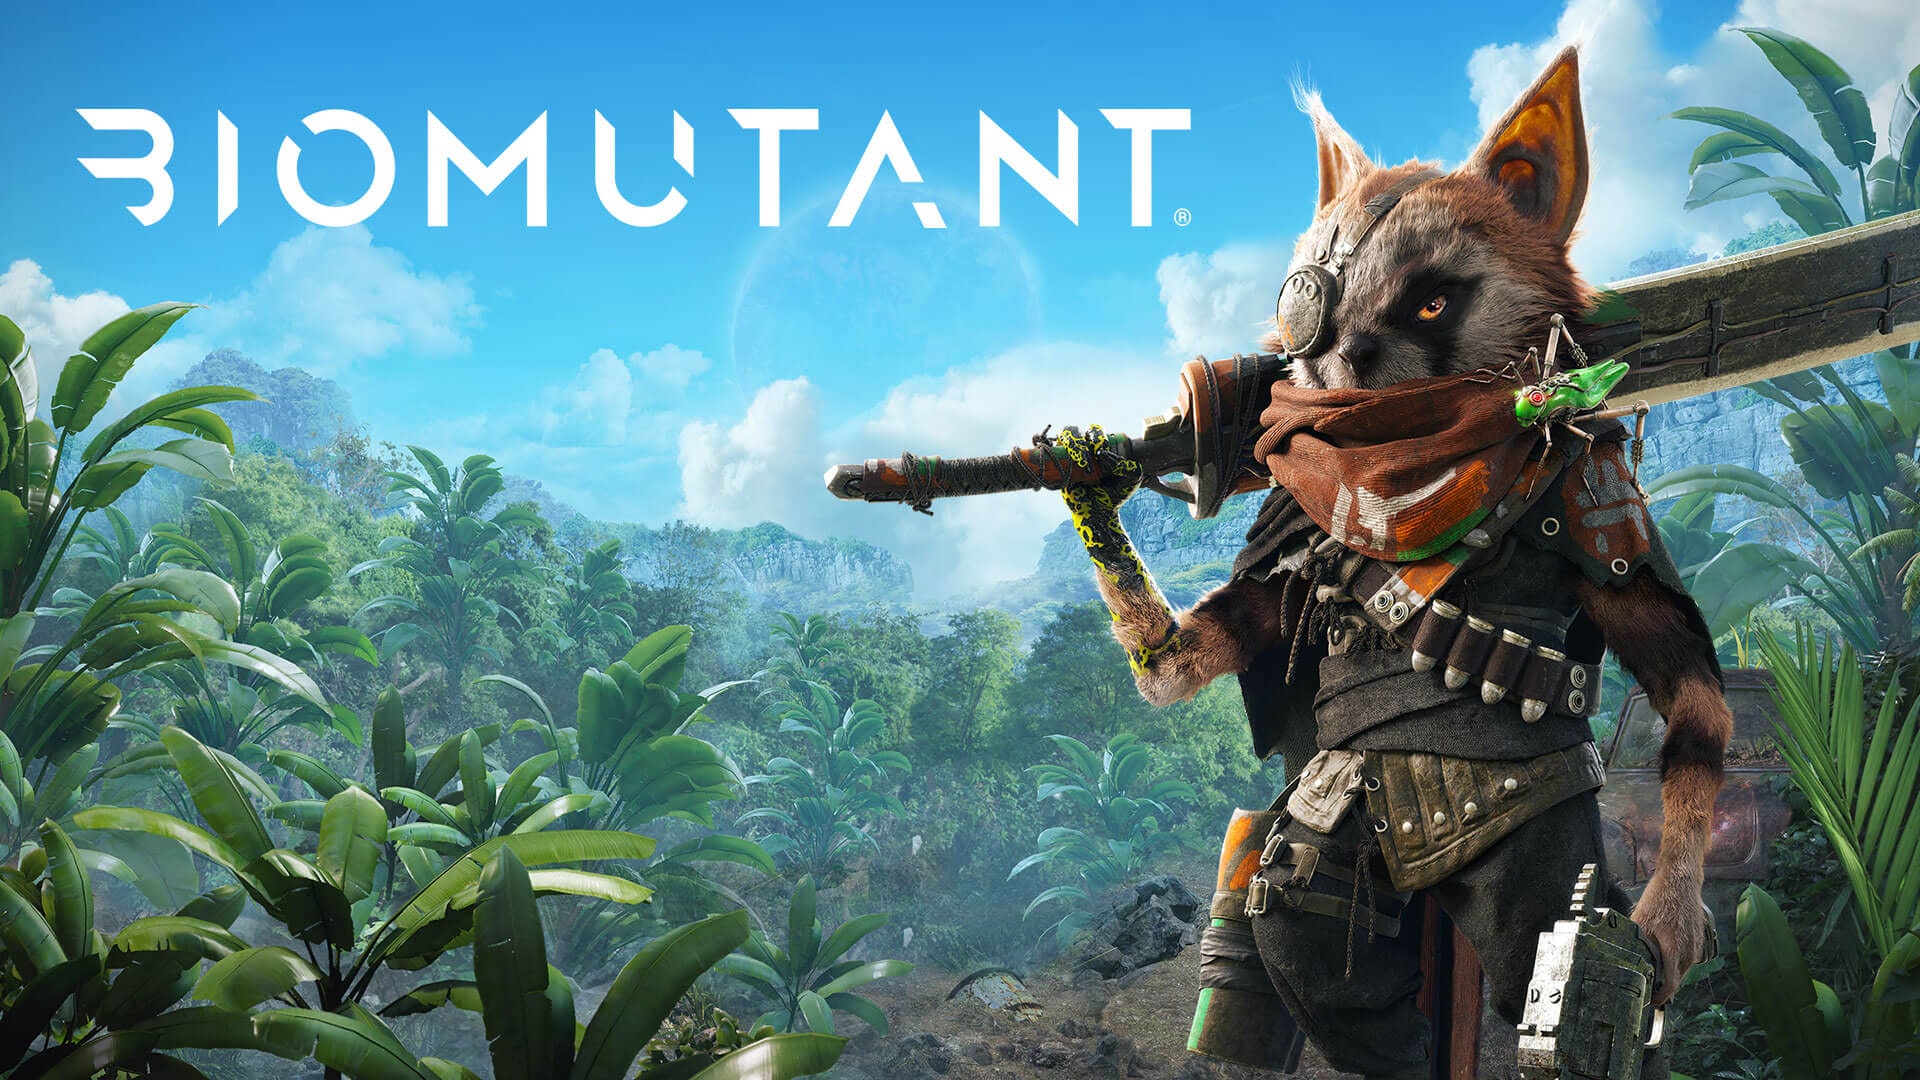 “So positive, now I’m depressed.” Biomutant trailer showed the world of the game